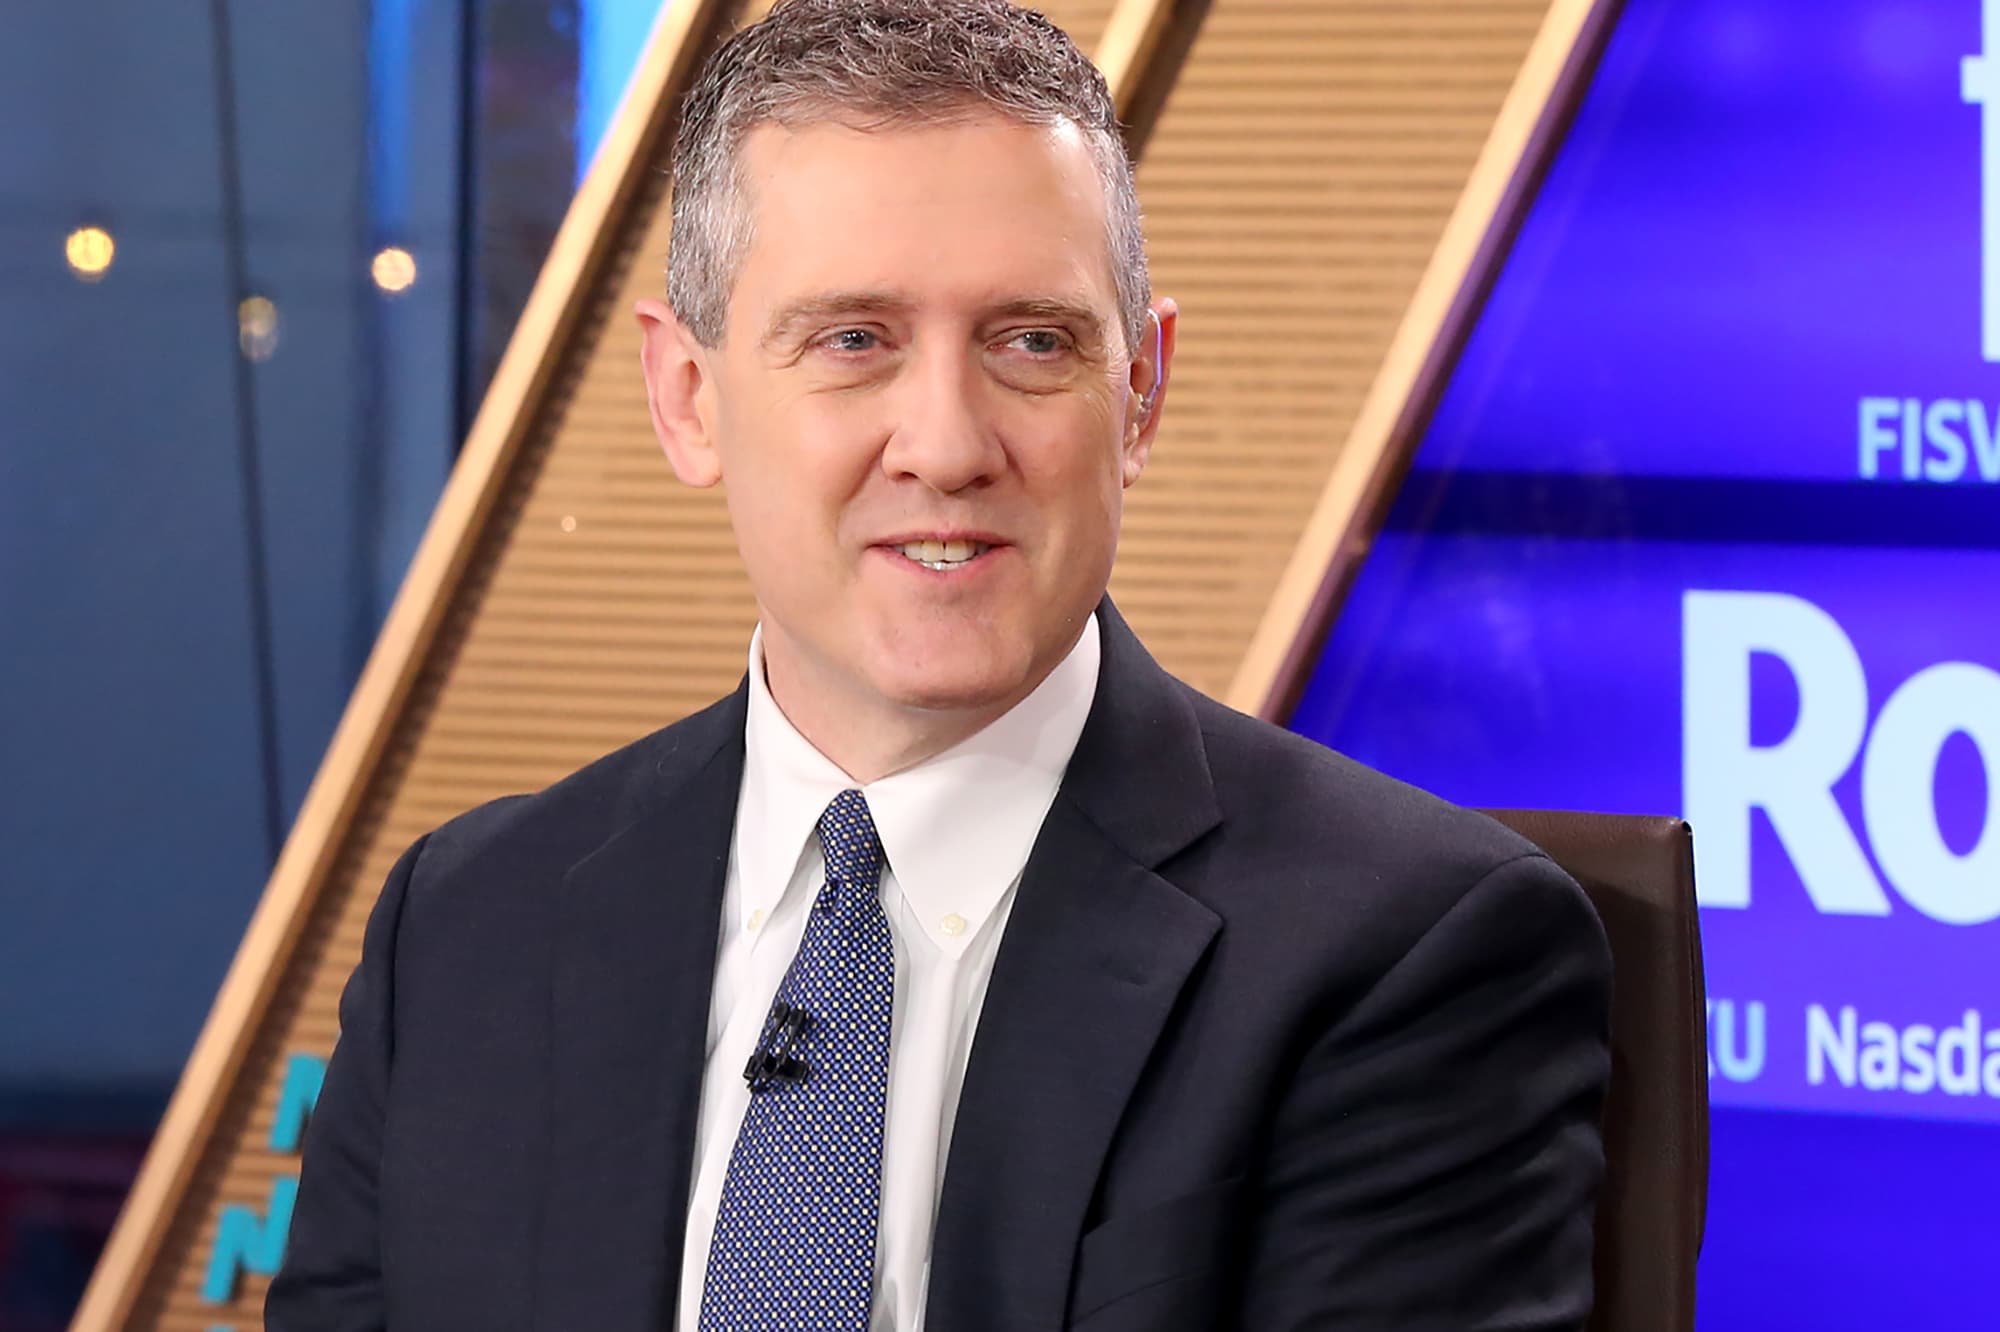 Fed’s Bullard does not see assets and doubts policy will intensify soon